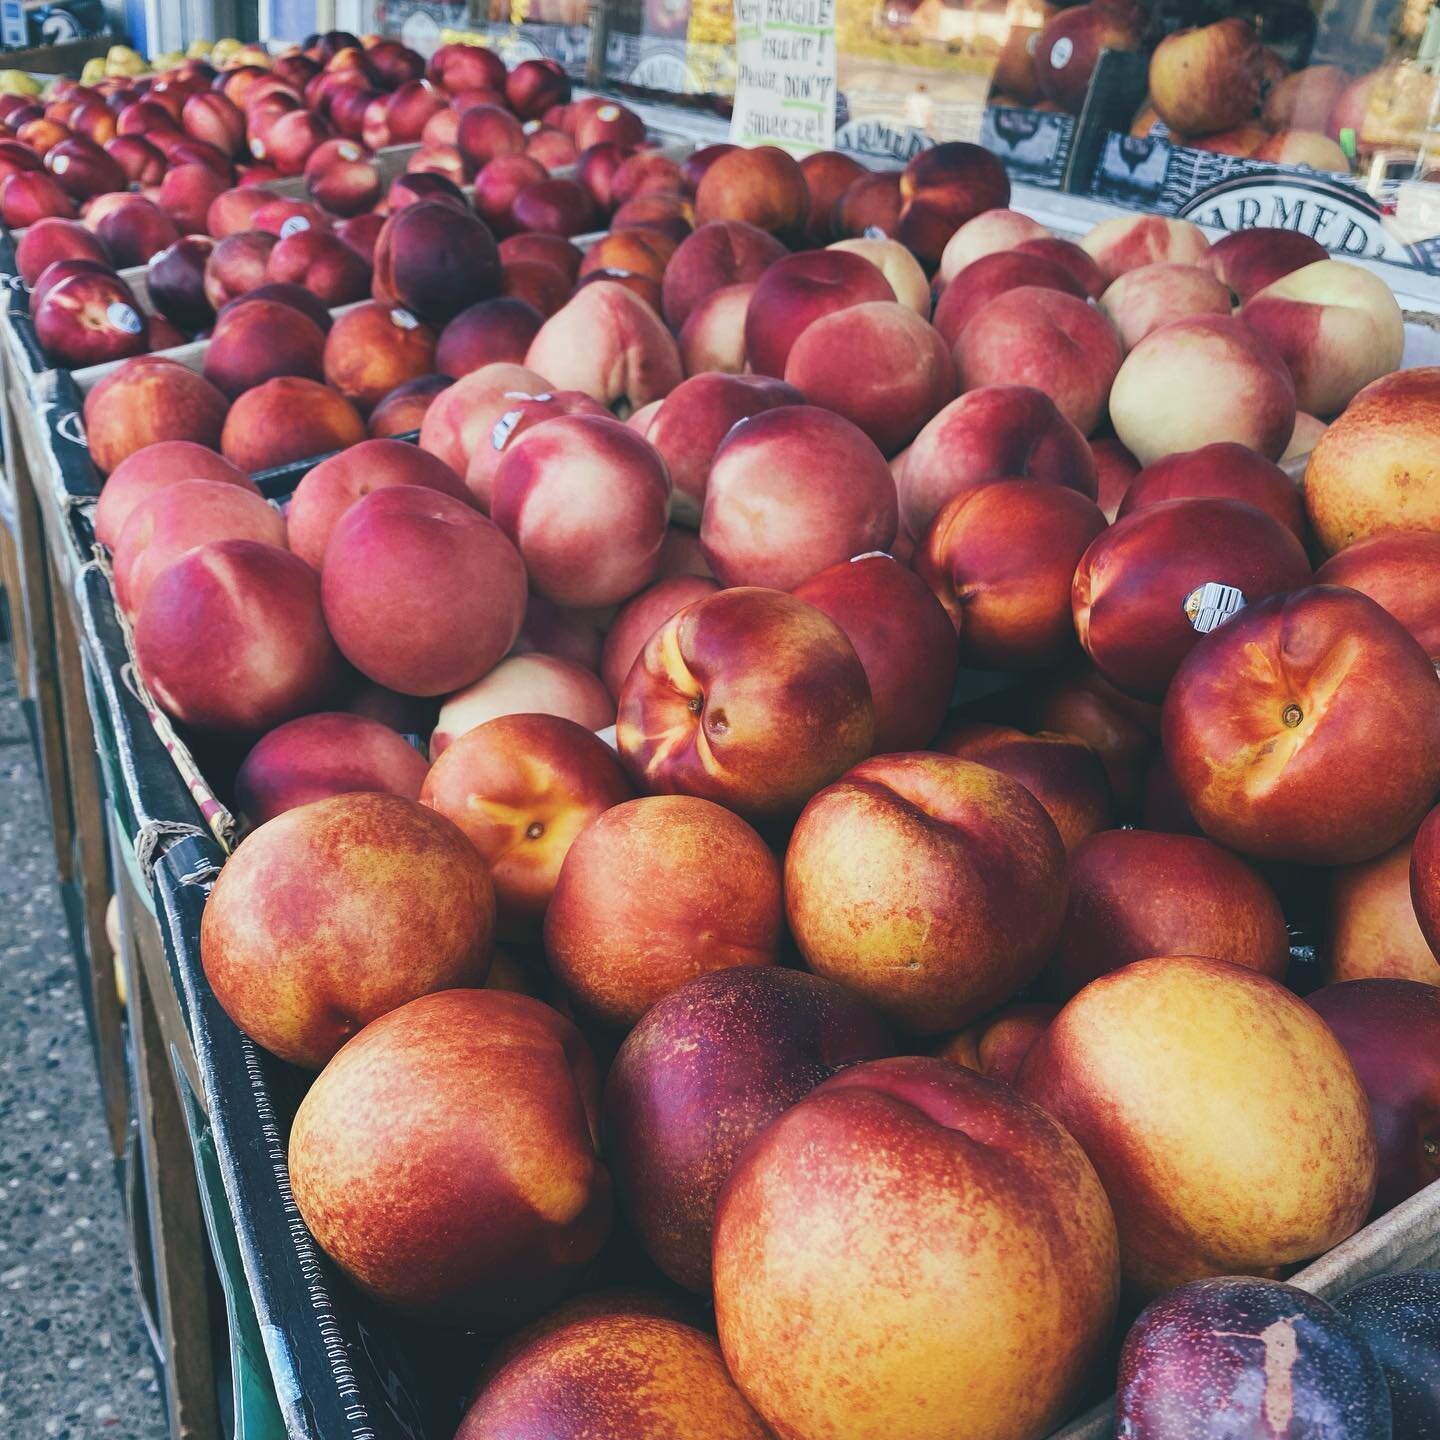 stone fruit galore at our little market in San Mateo - peak season and we love them all &hellip; a little reminder that our father hand selects all our fresh produce daily for both our Markets..